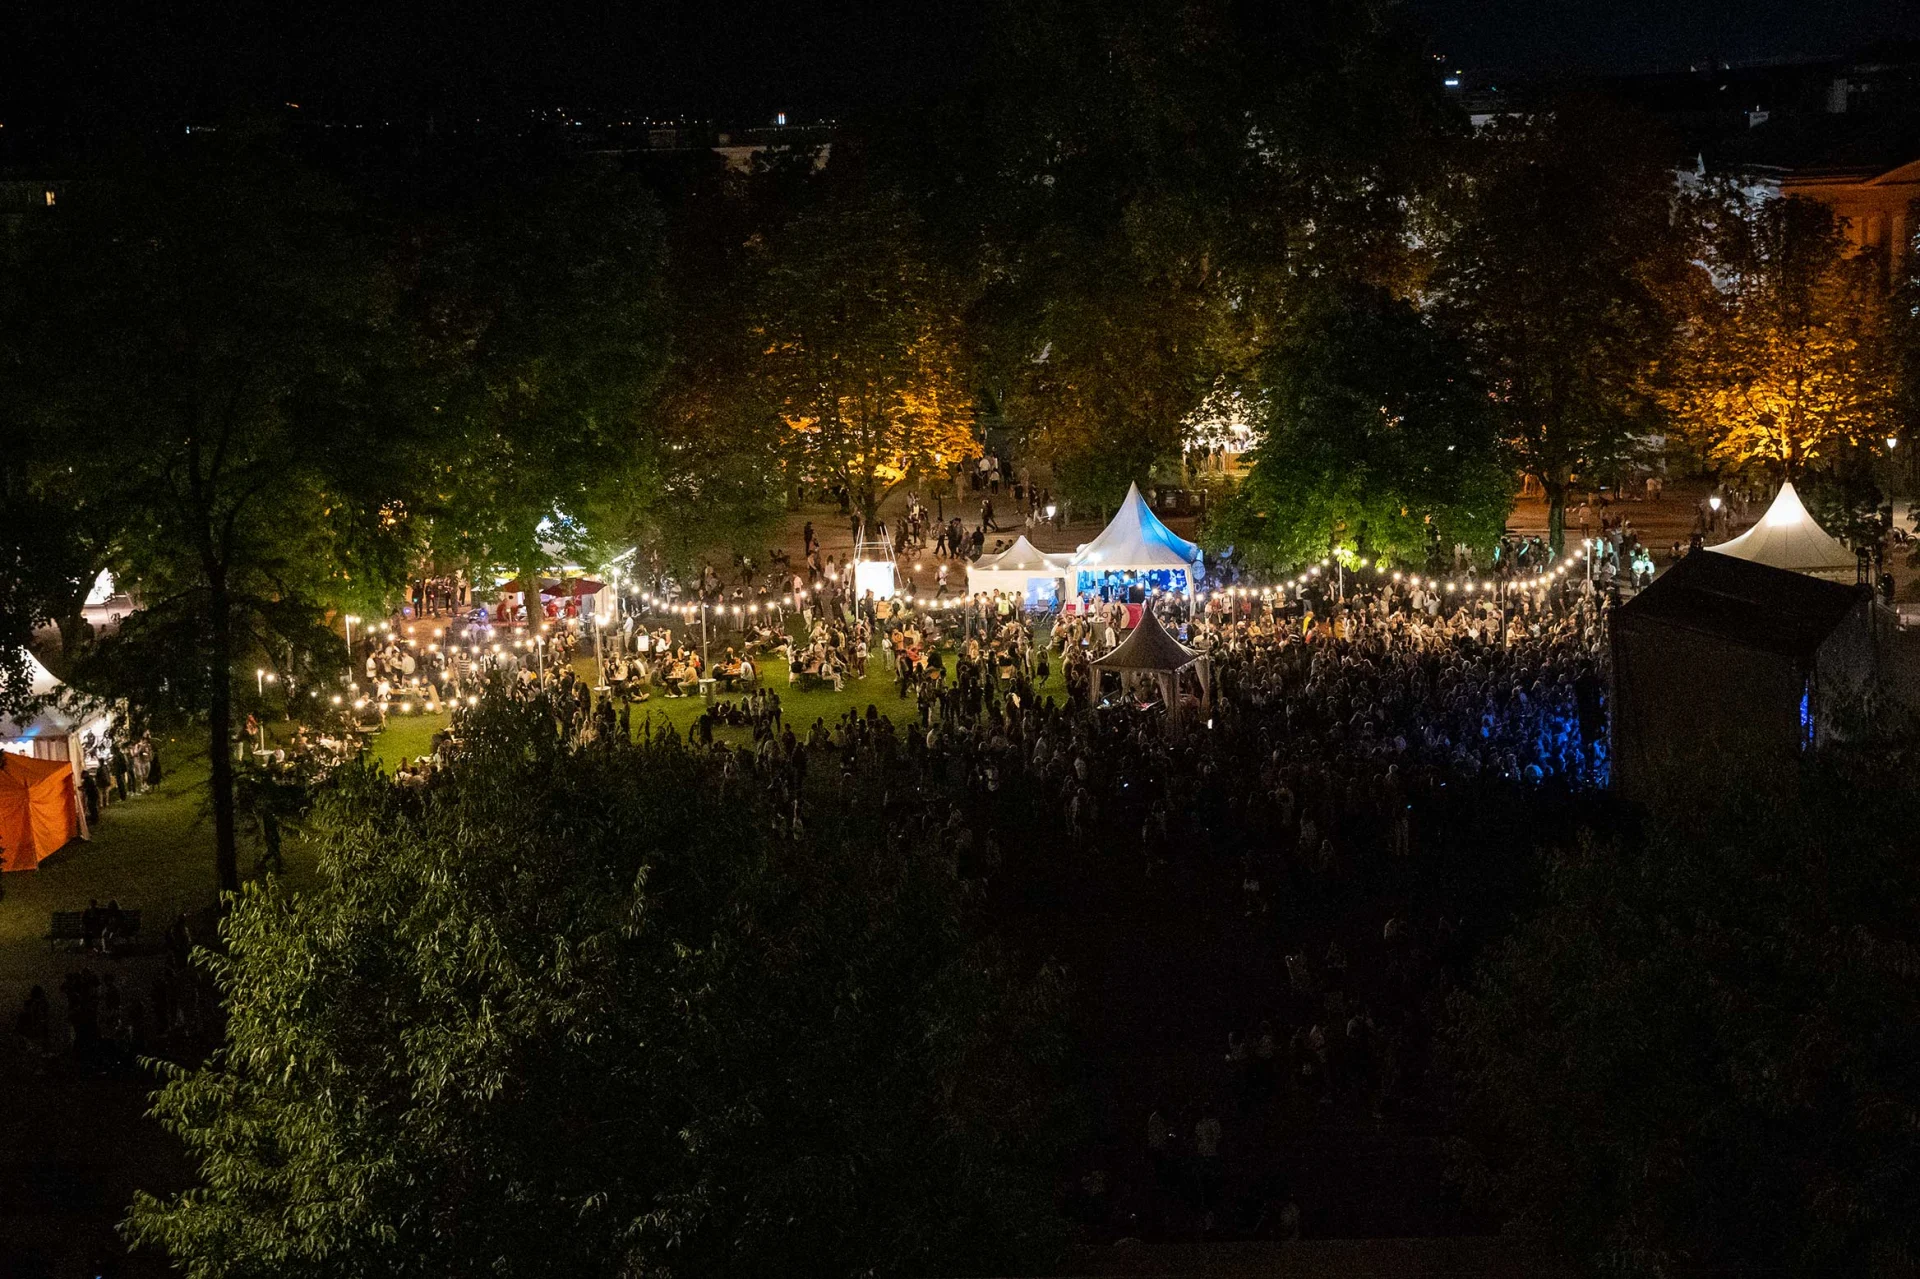 View of the festival site from above at night